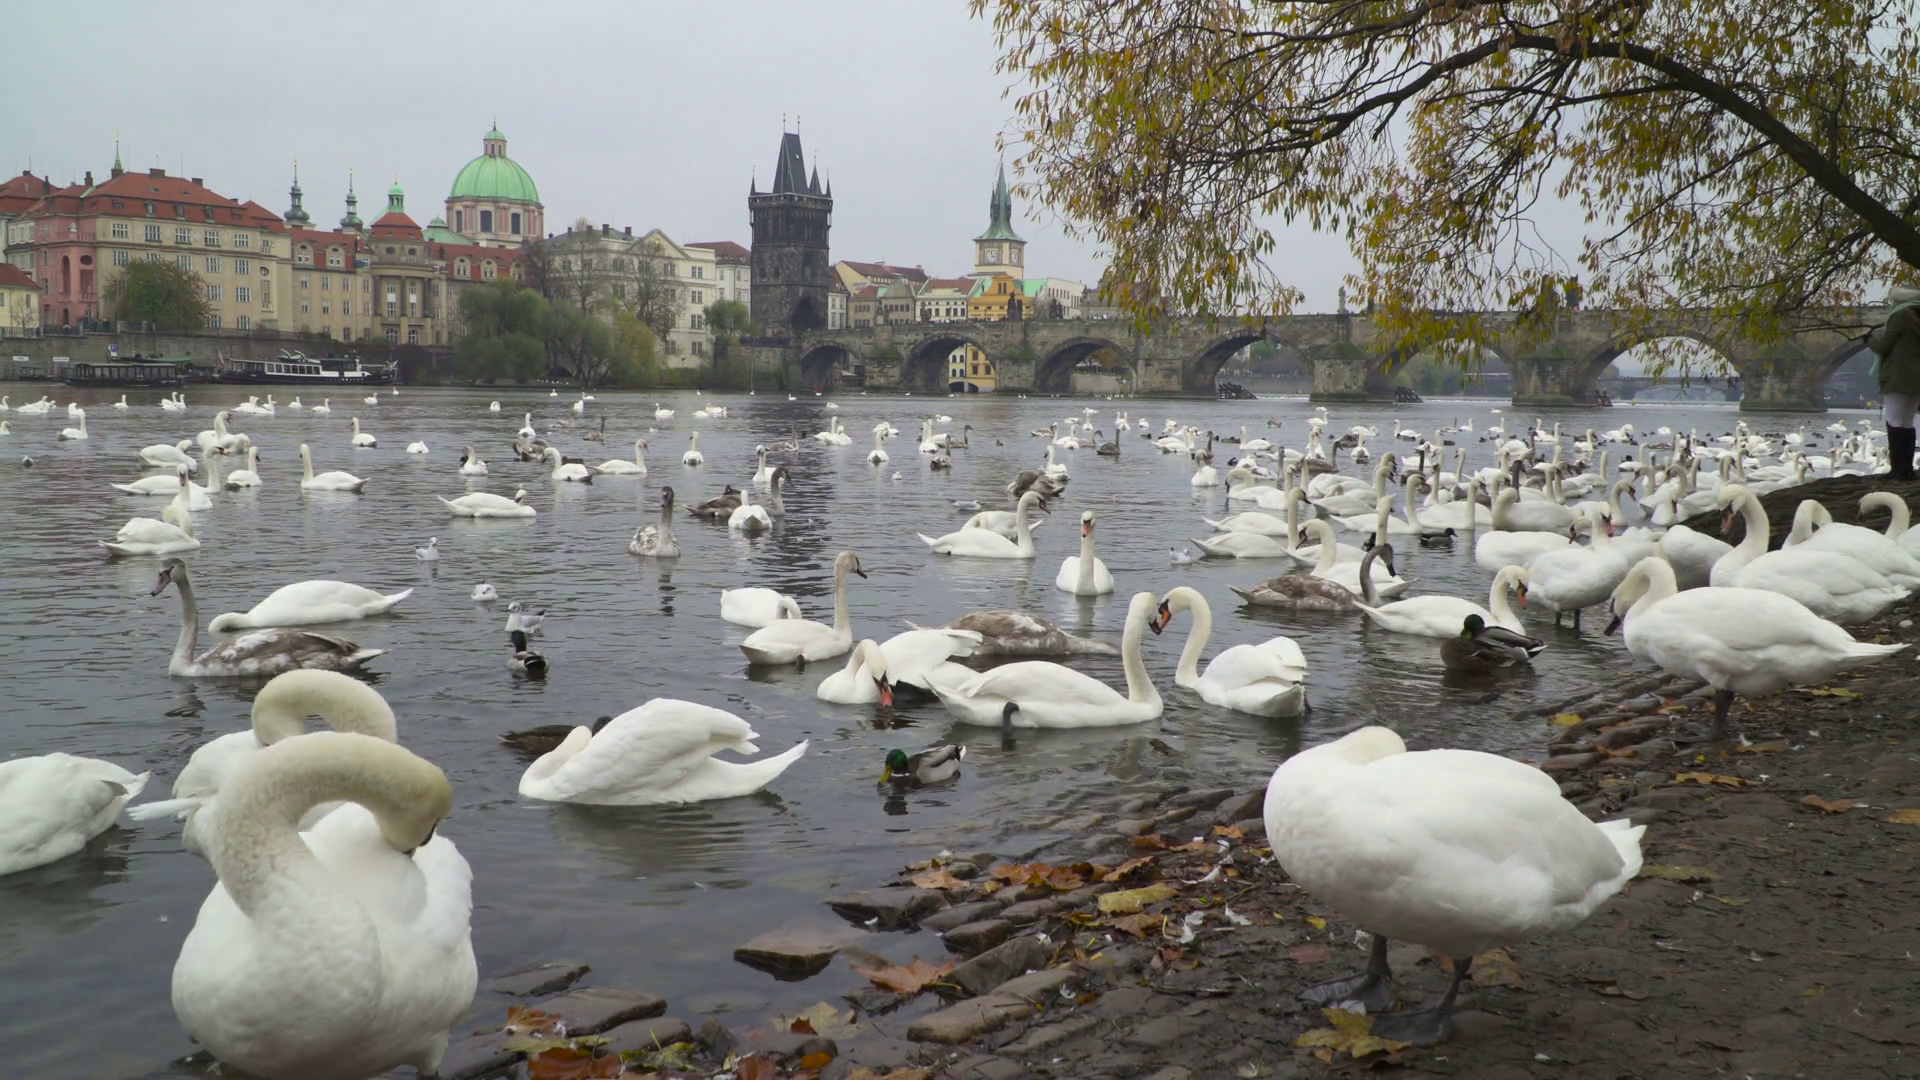 A Group Of Swans in The Vltava River In Prague. Autumn Sony FS5 4K ...